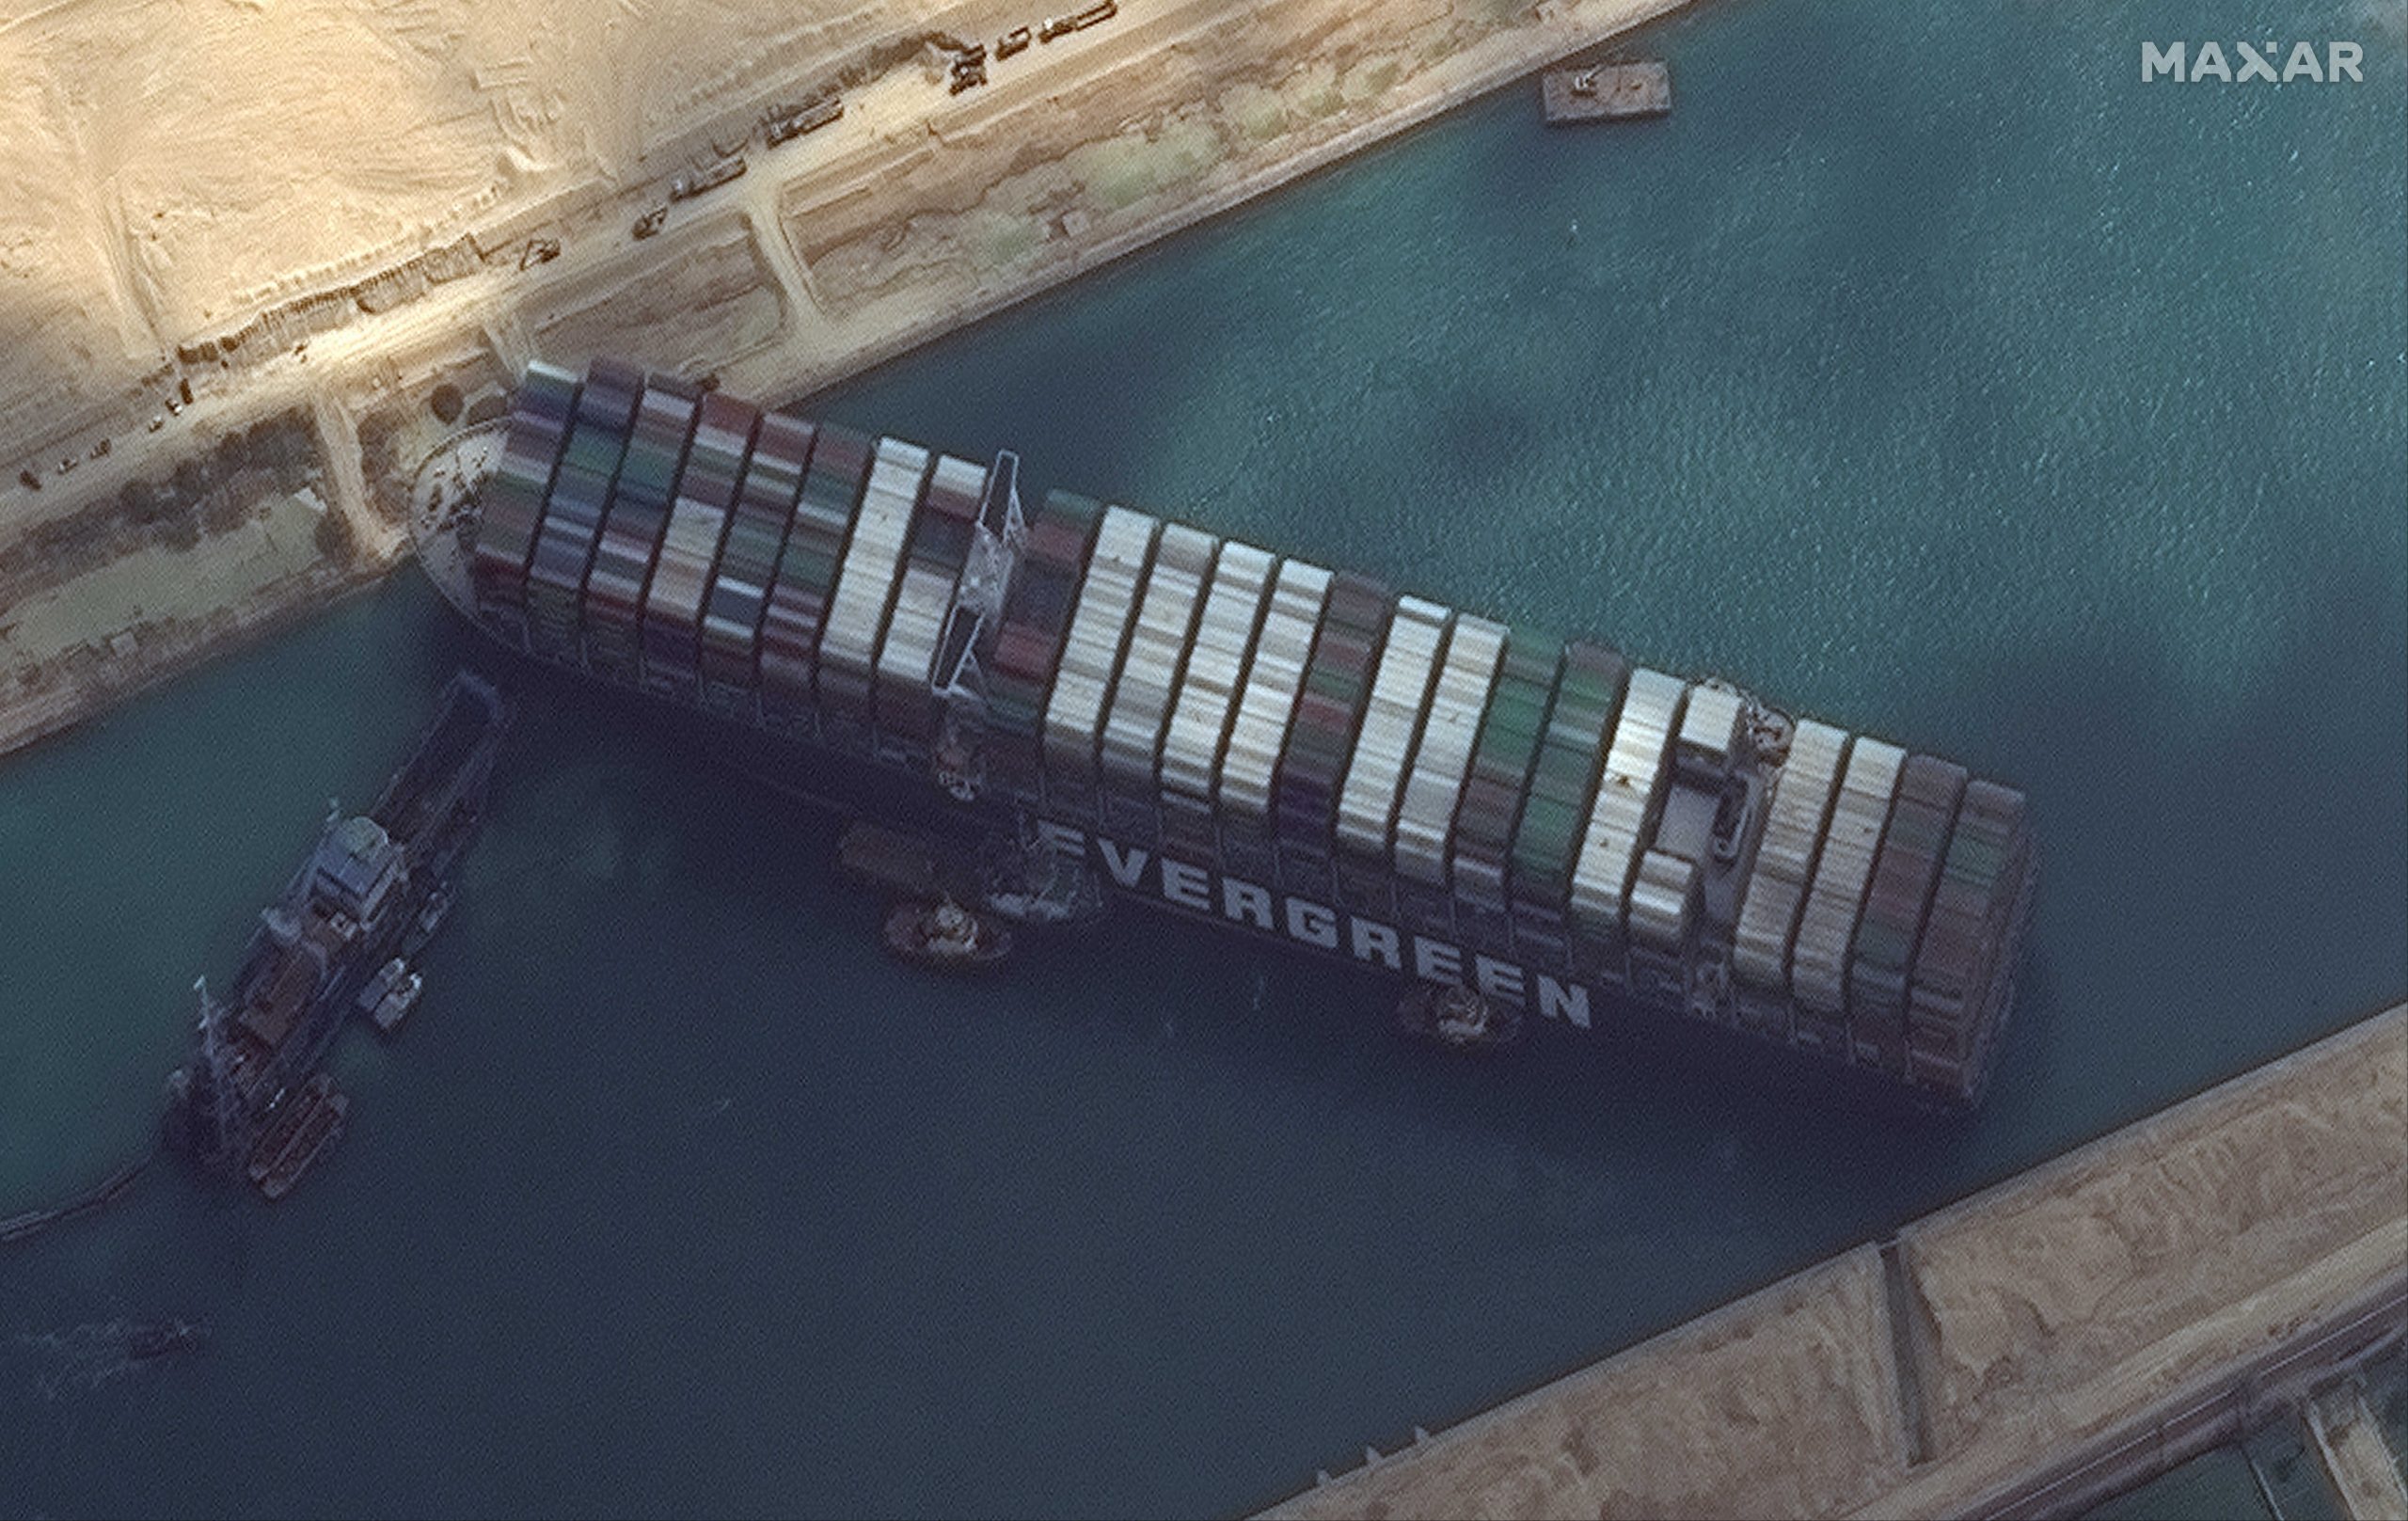 Ship, blocking Suez Canal, ‘has turned’ but not afloat, says owner